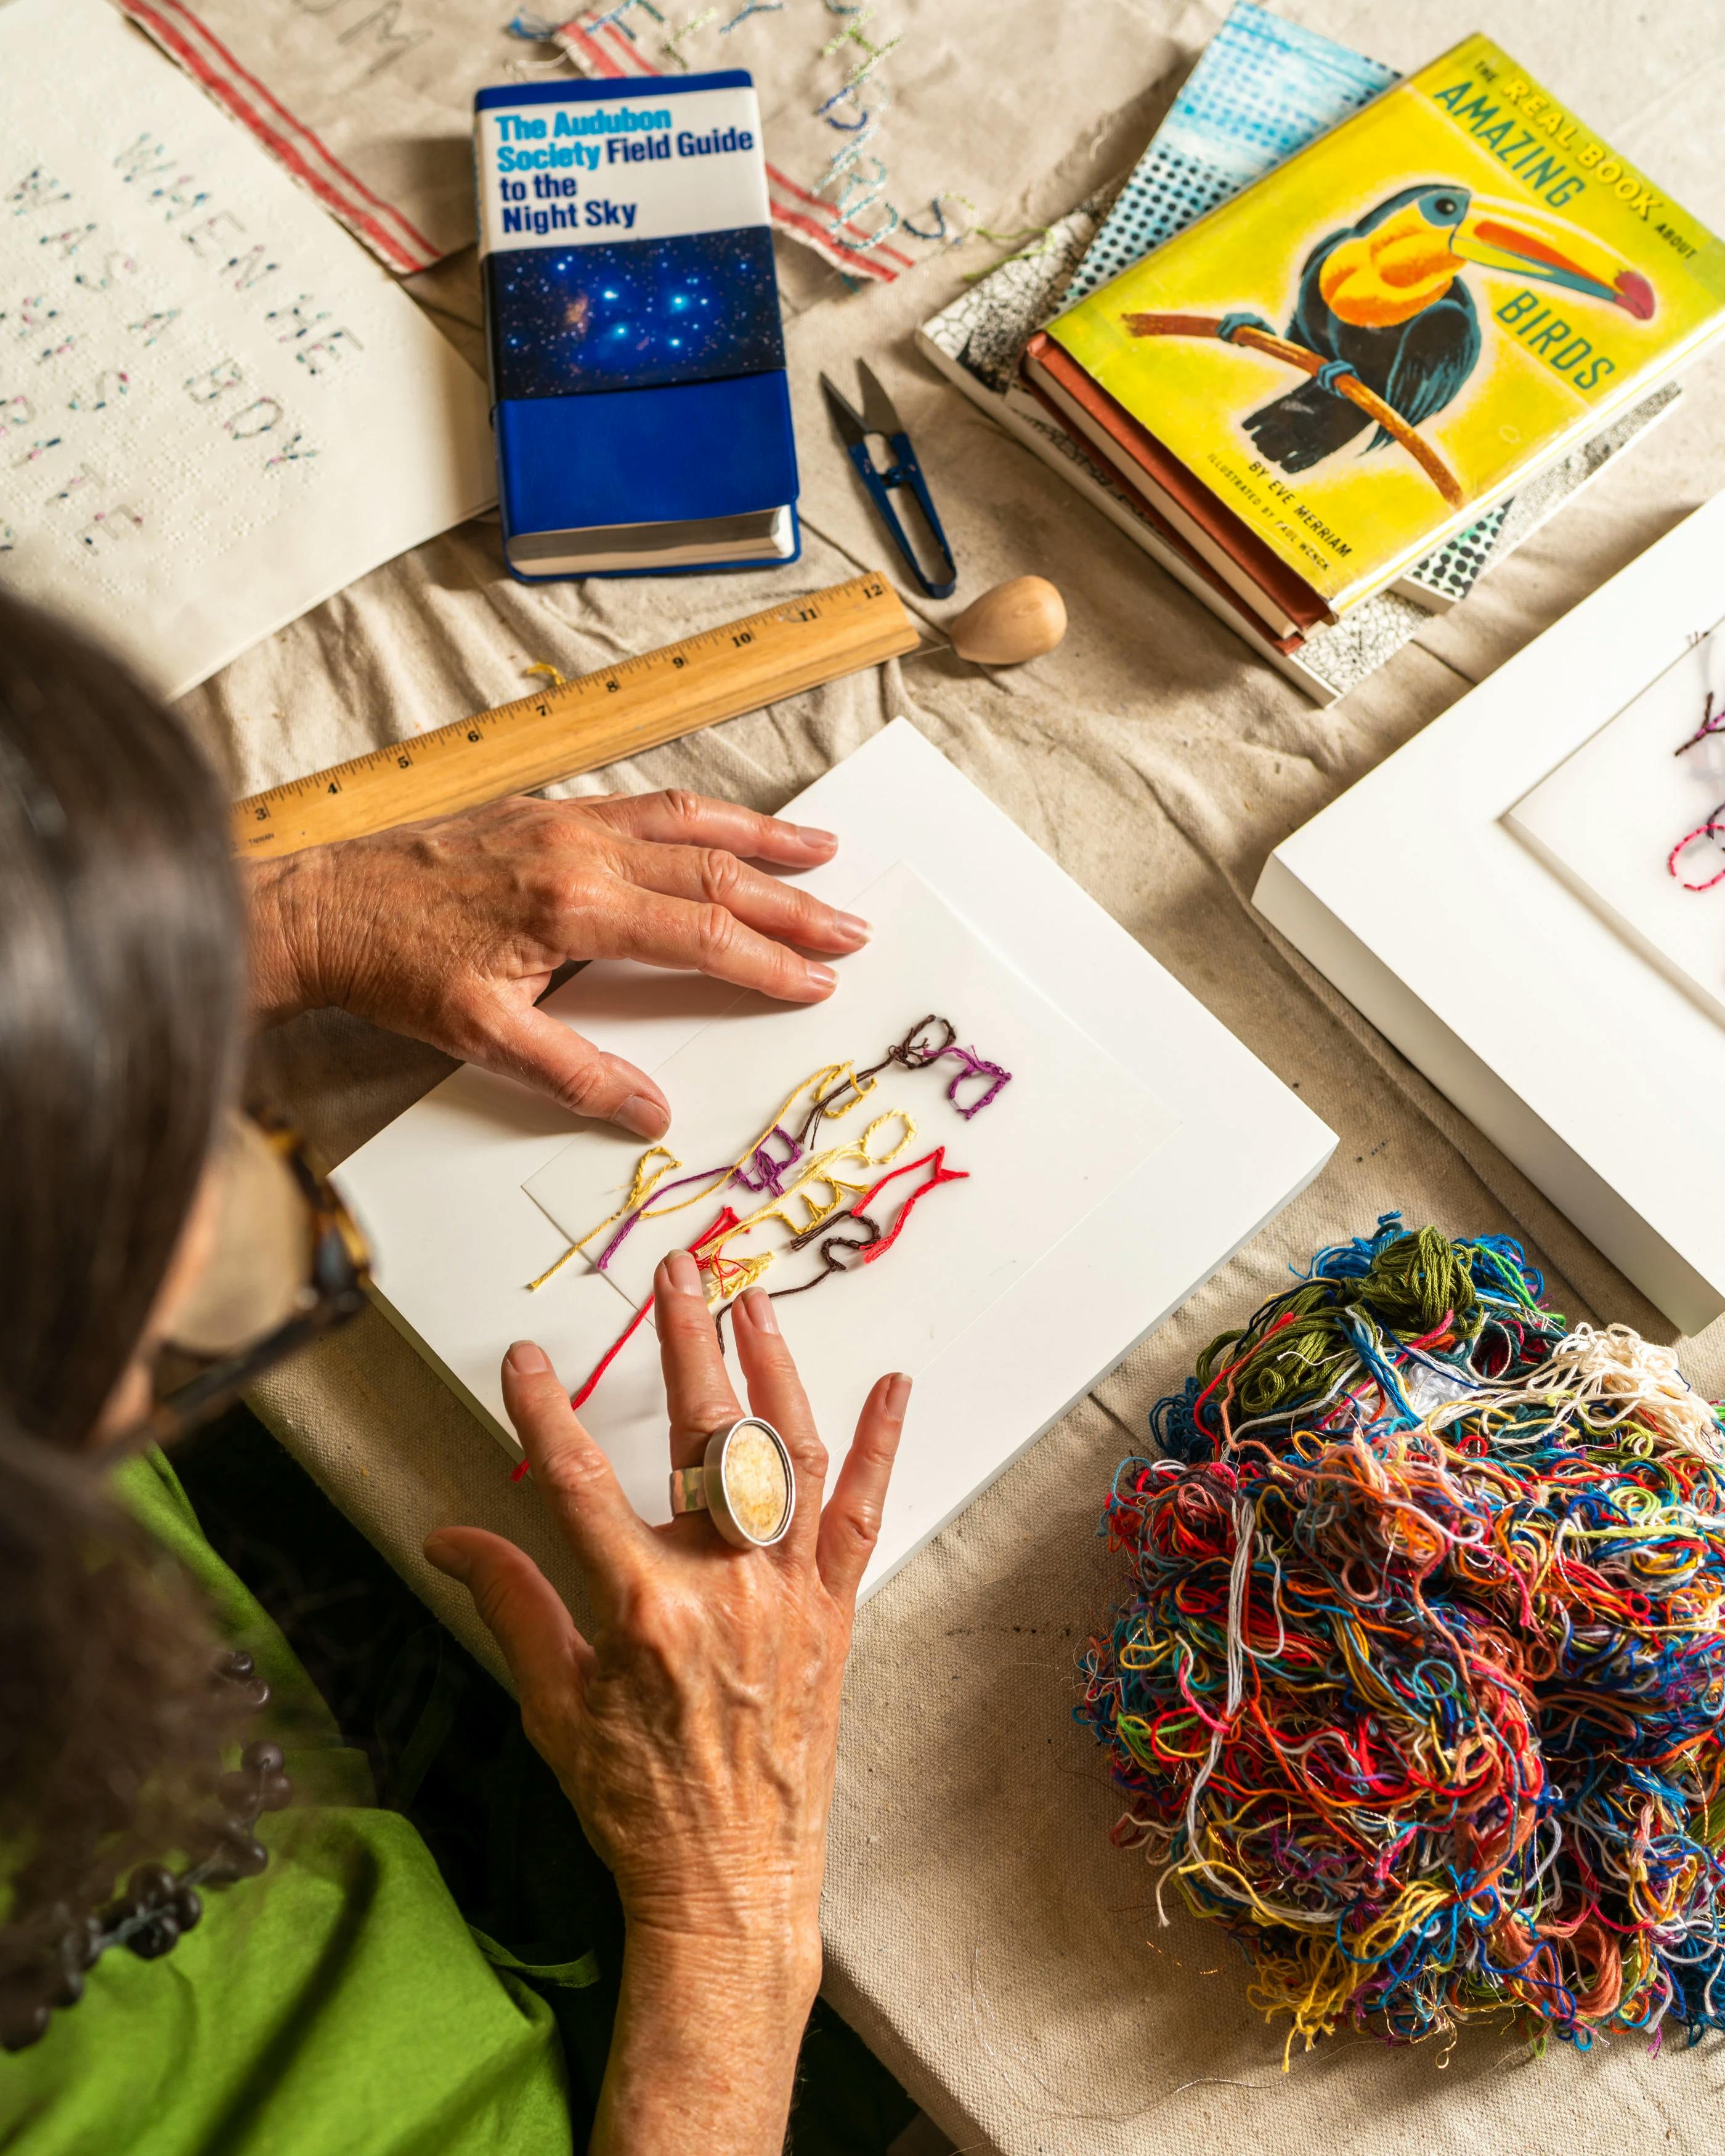 Artist Gail Tarantino threading words on canvas during her residency at MacArthur Place in Sonoma, CA. 